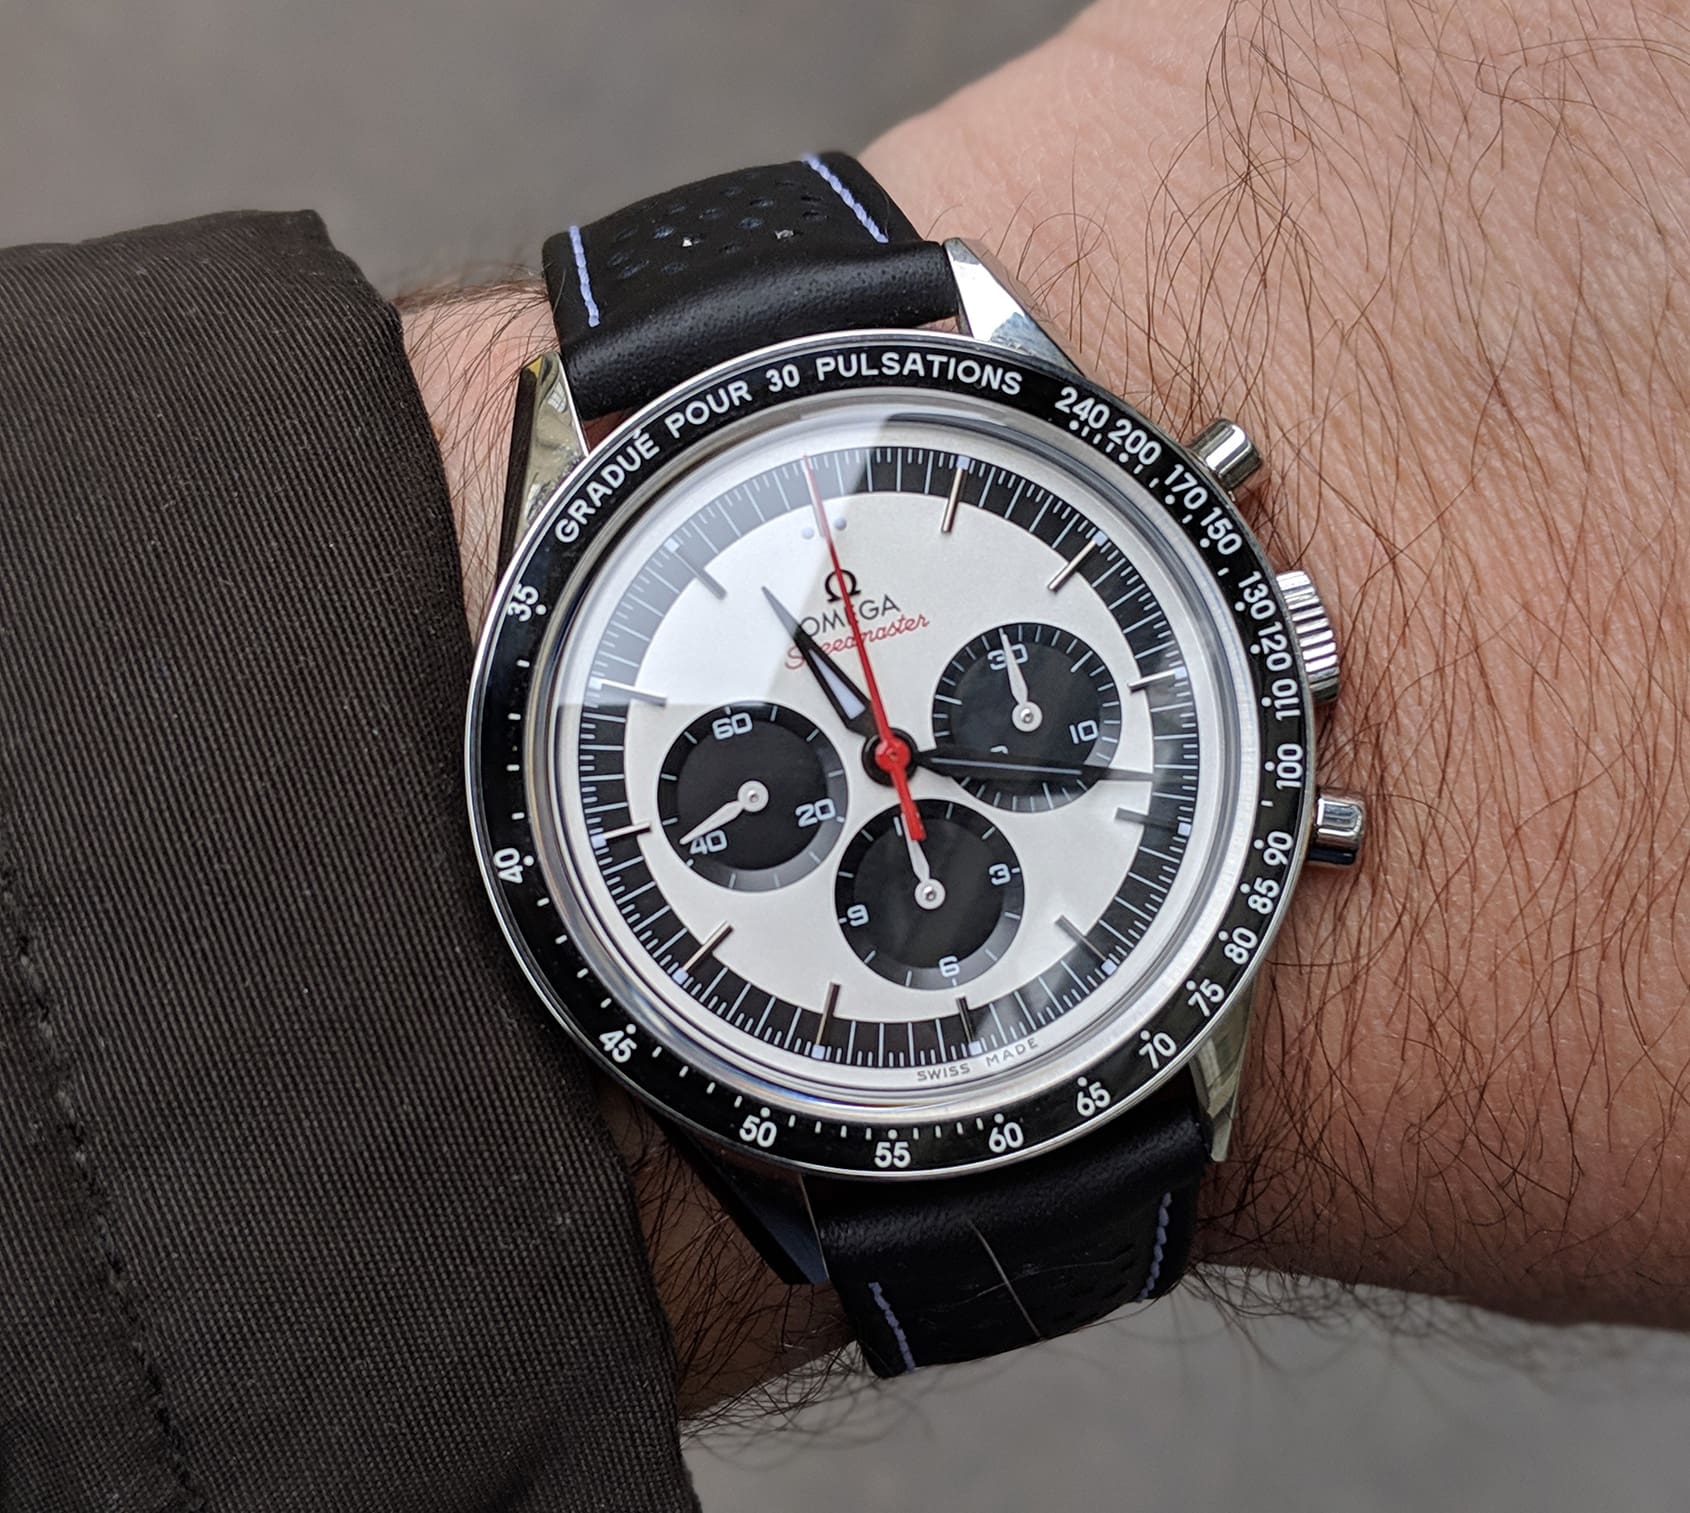 MY WEEK WITH: The Omega Speedmaster CK 2998